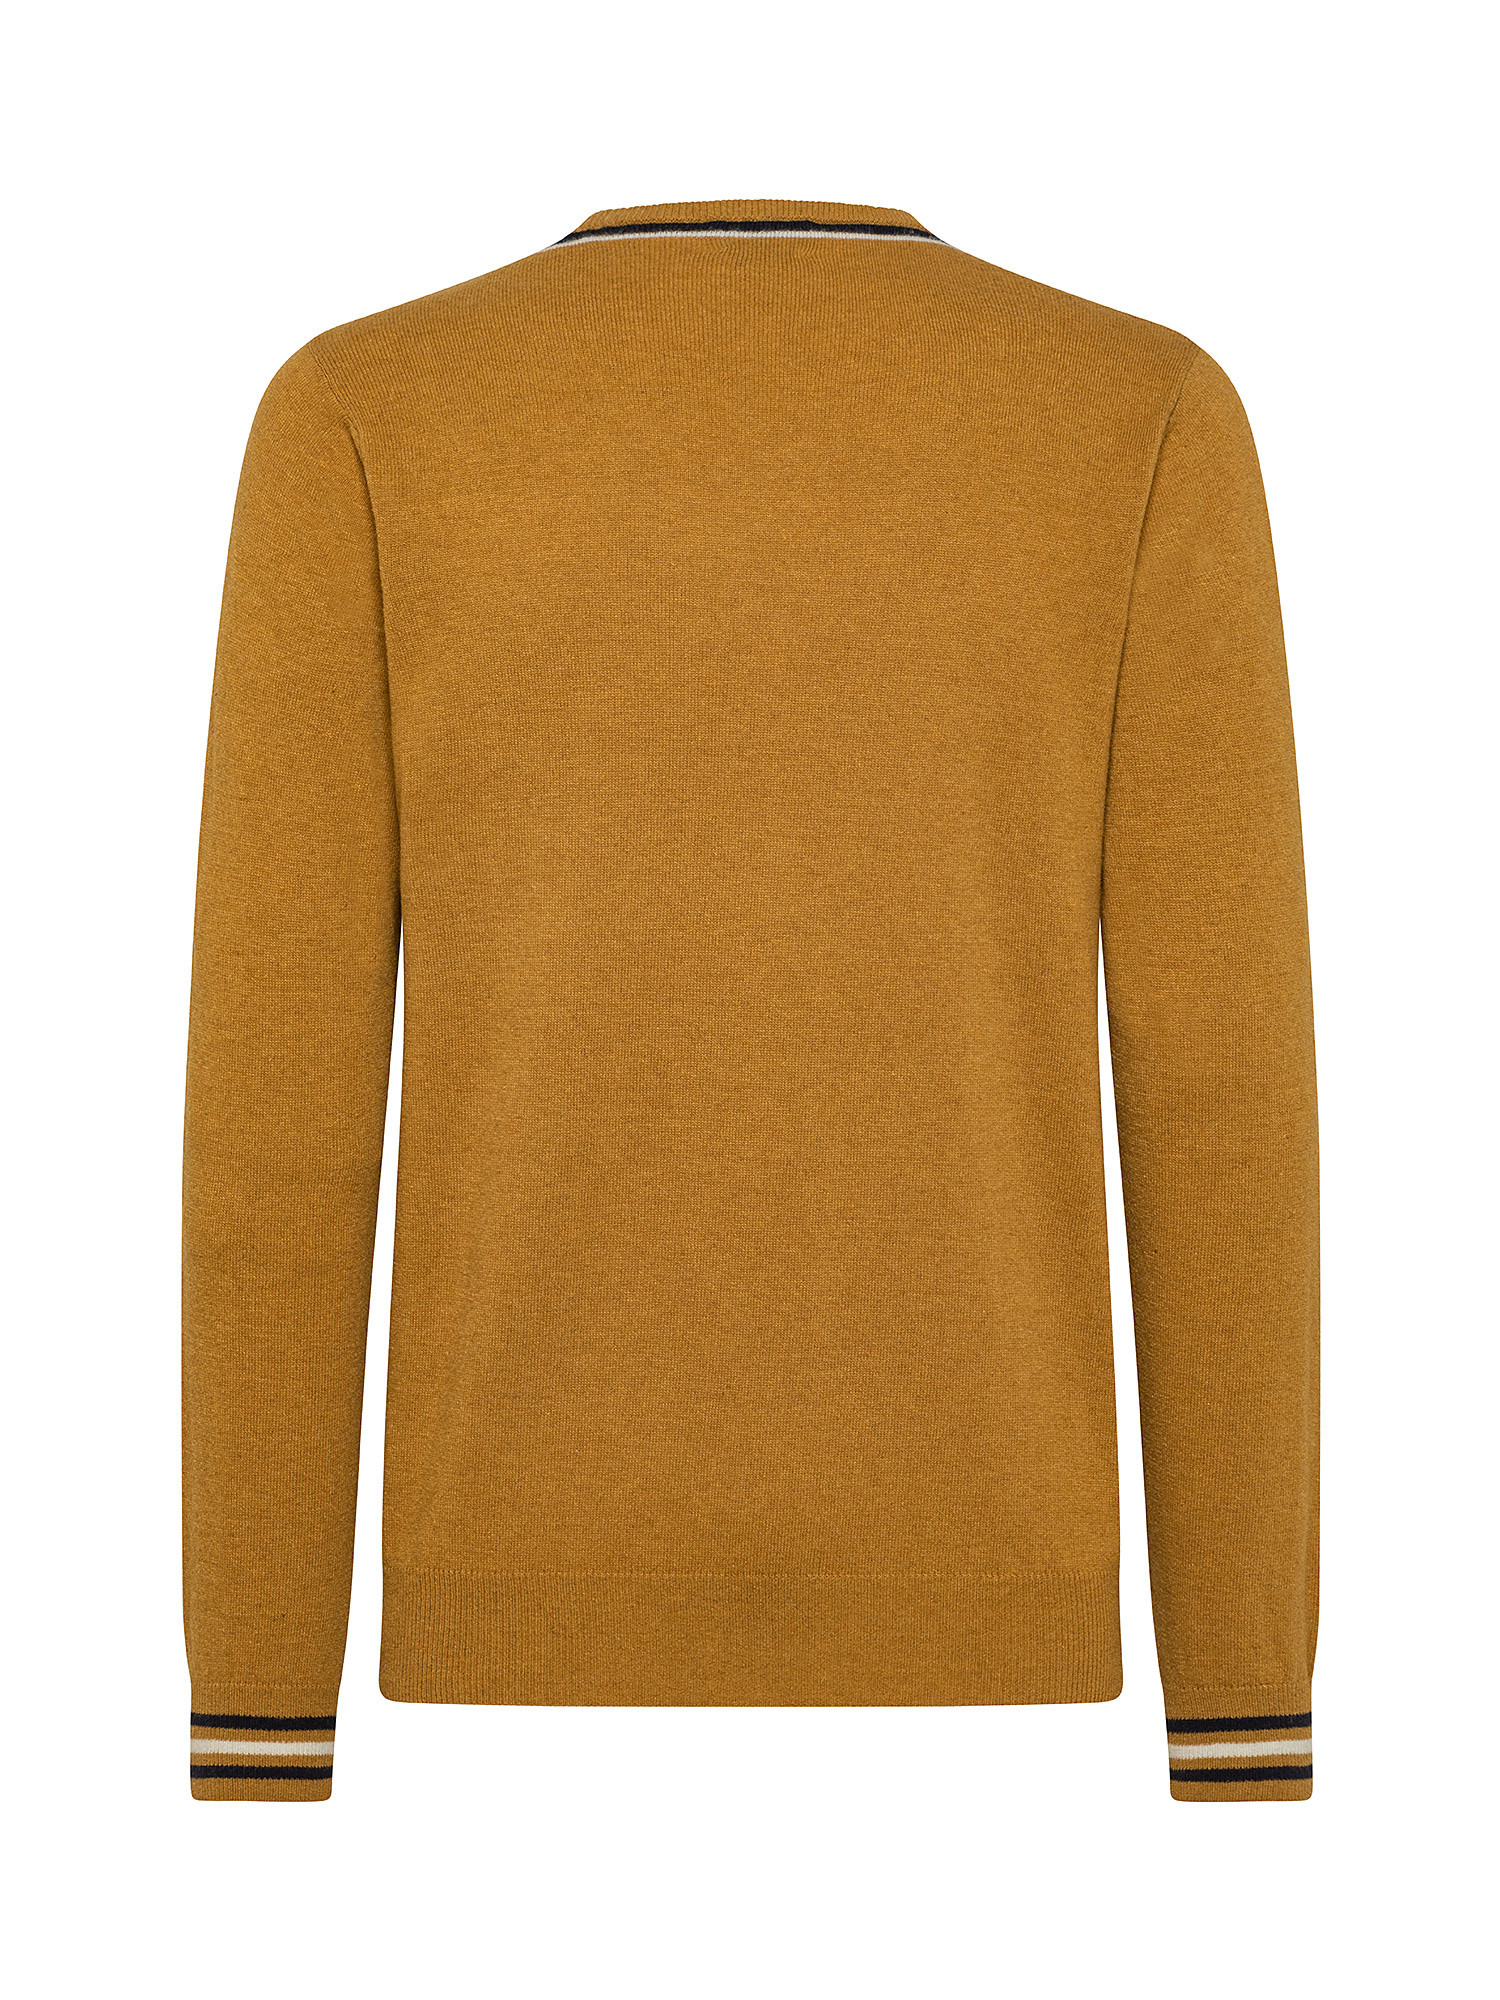 Crewneck sweater with Blend cashmere insert, Ocra Yellow, large image number 1